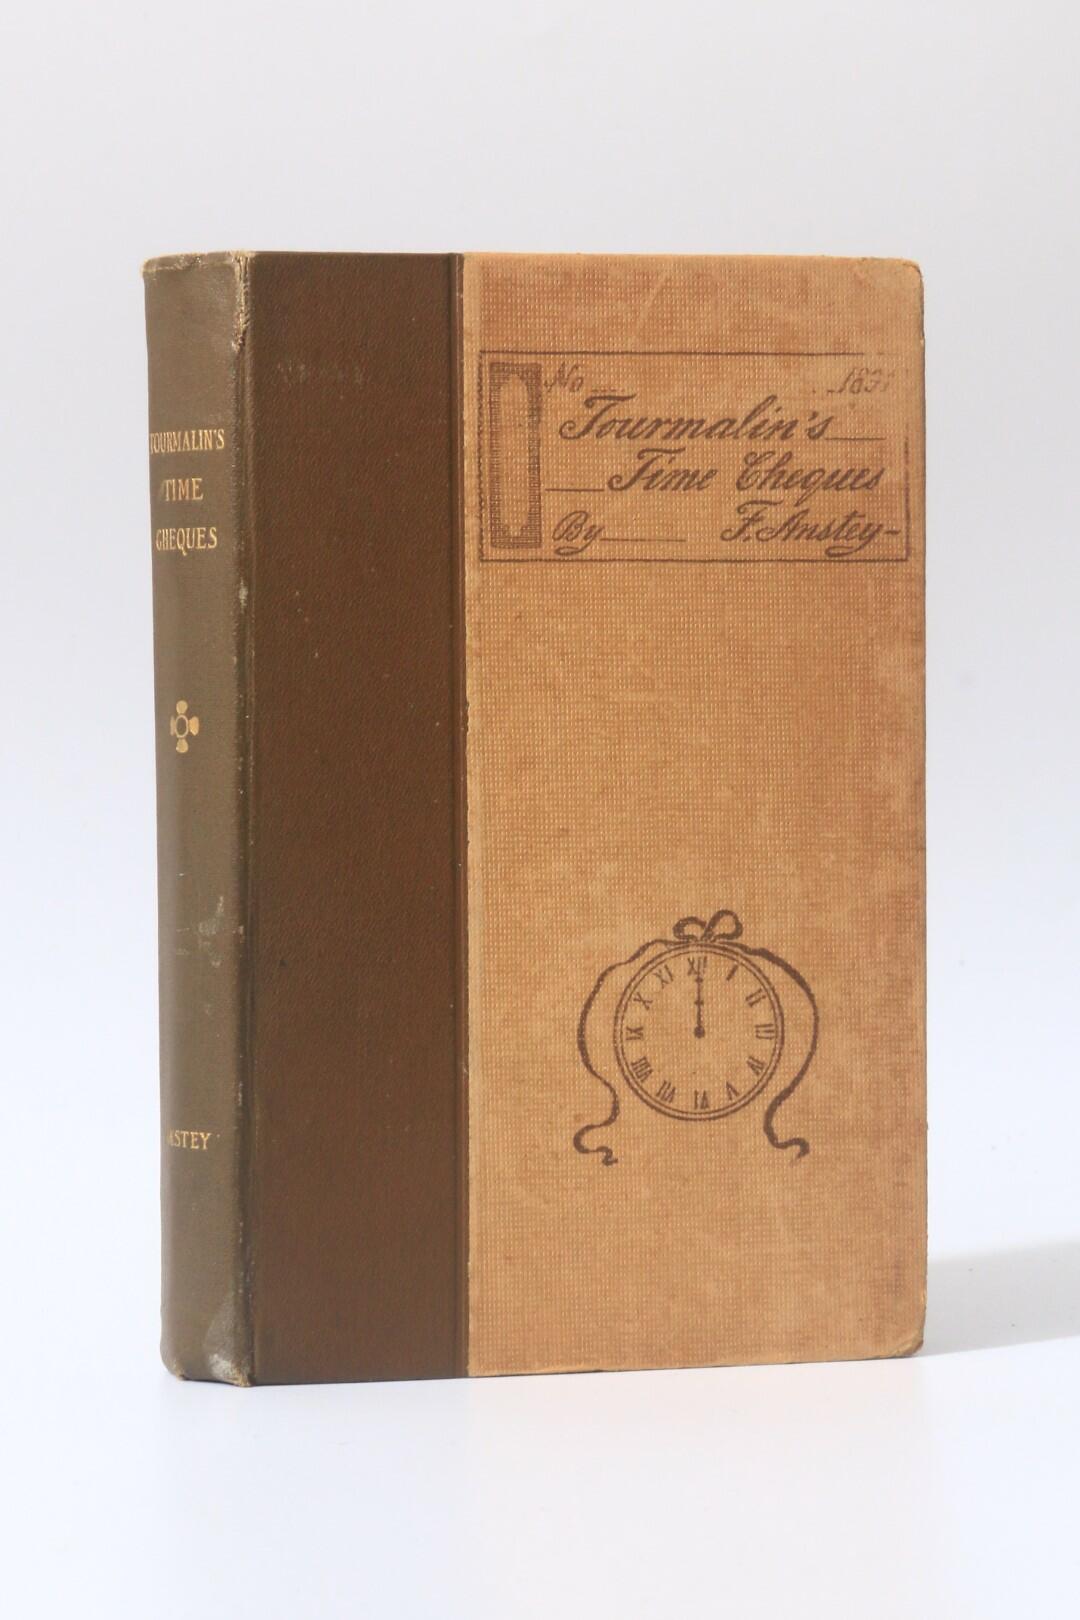 F. Anstey - Tourmalin's Time Cheques - D. Appleton & Co., 1891, First Edition.